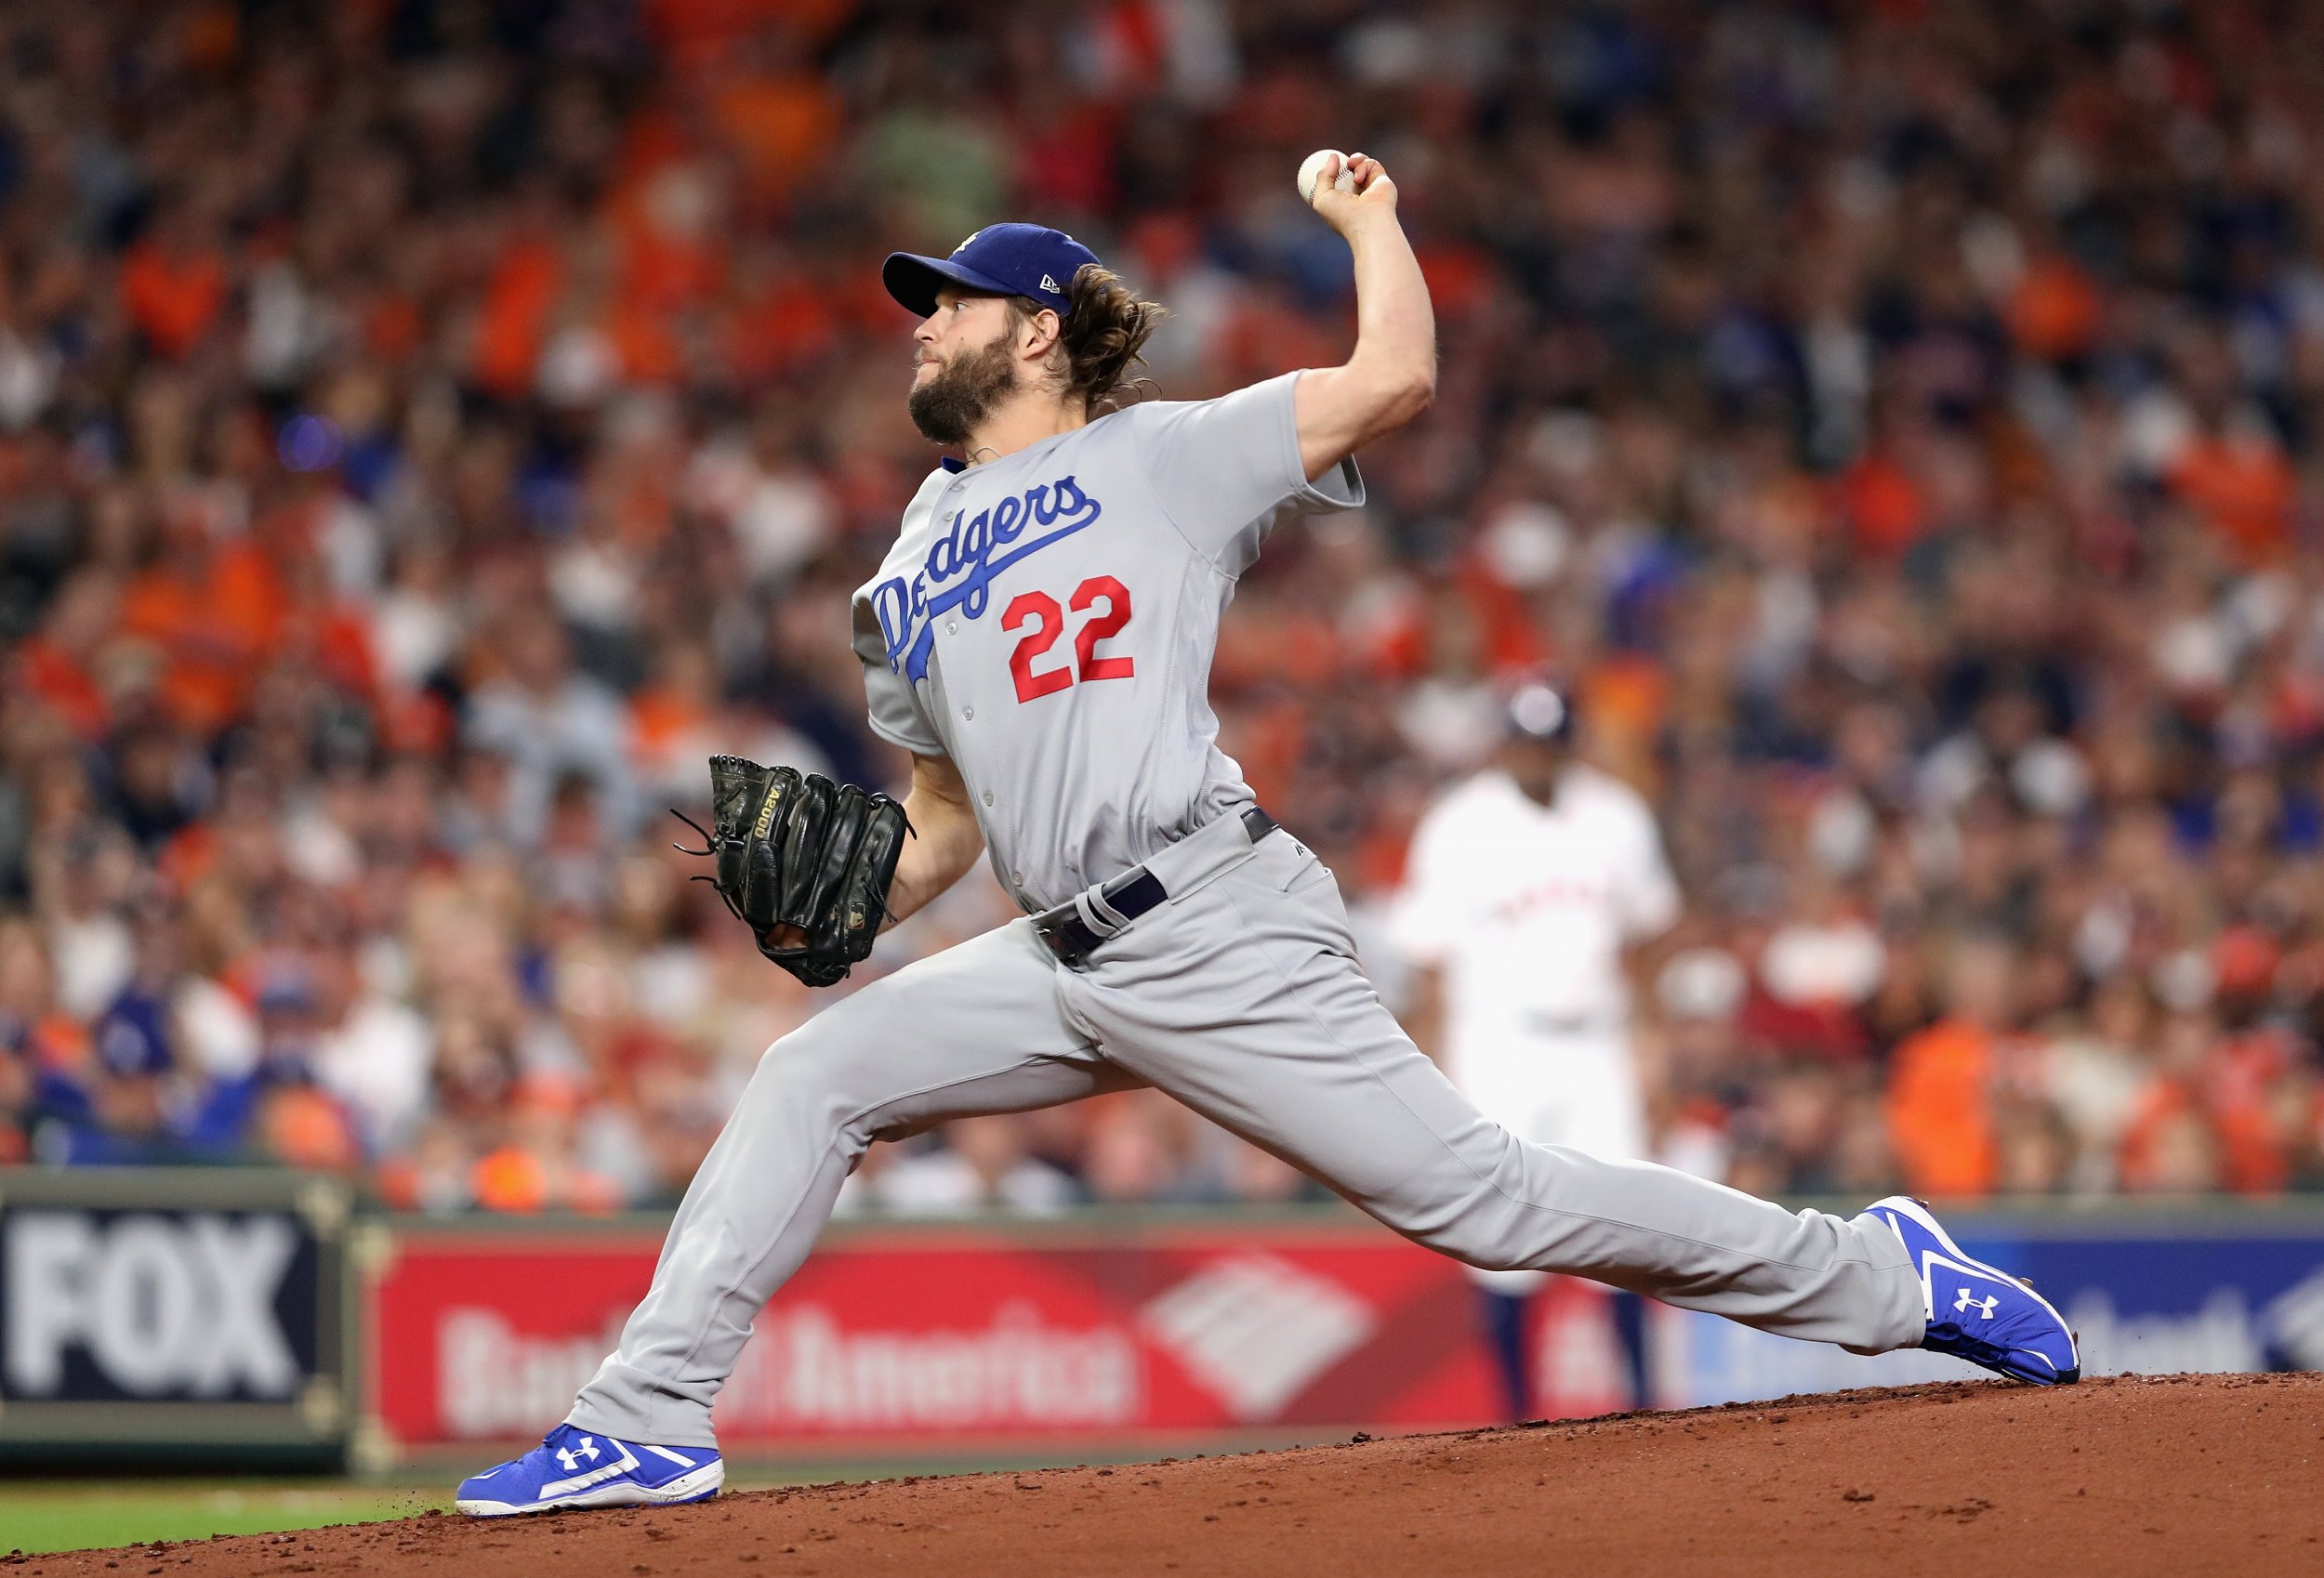 Clayton Kershaw Of The Los Angeles Dodgers At Minute - Pitcher - HD Wallpaper 